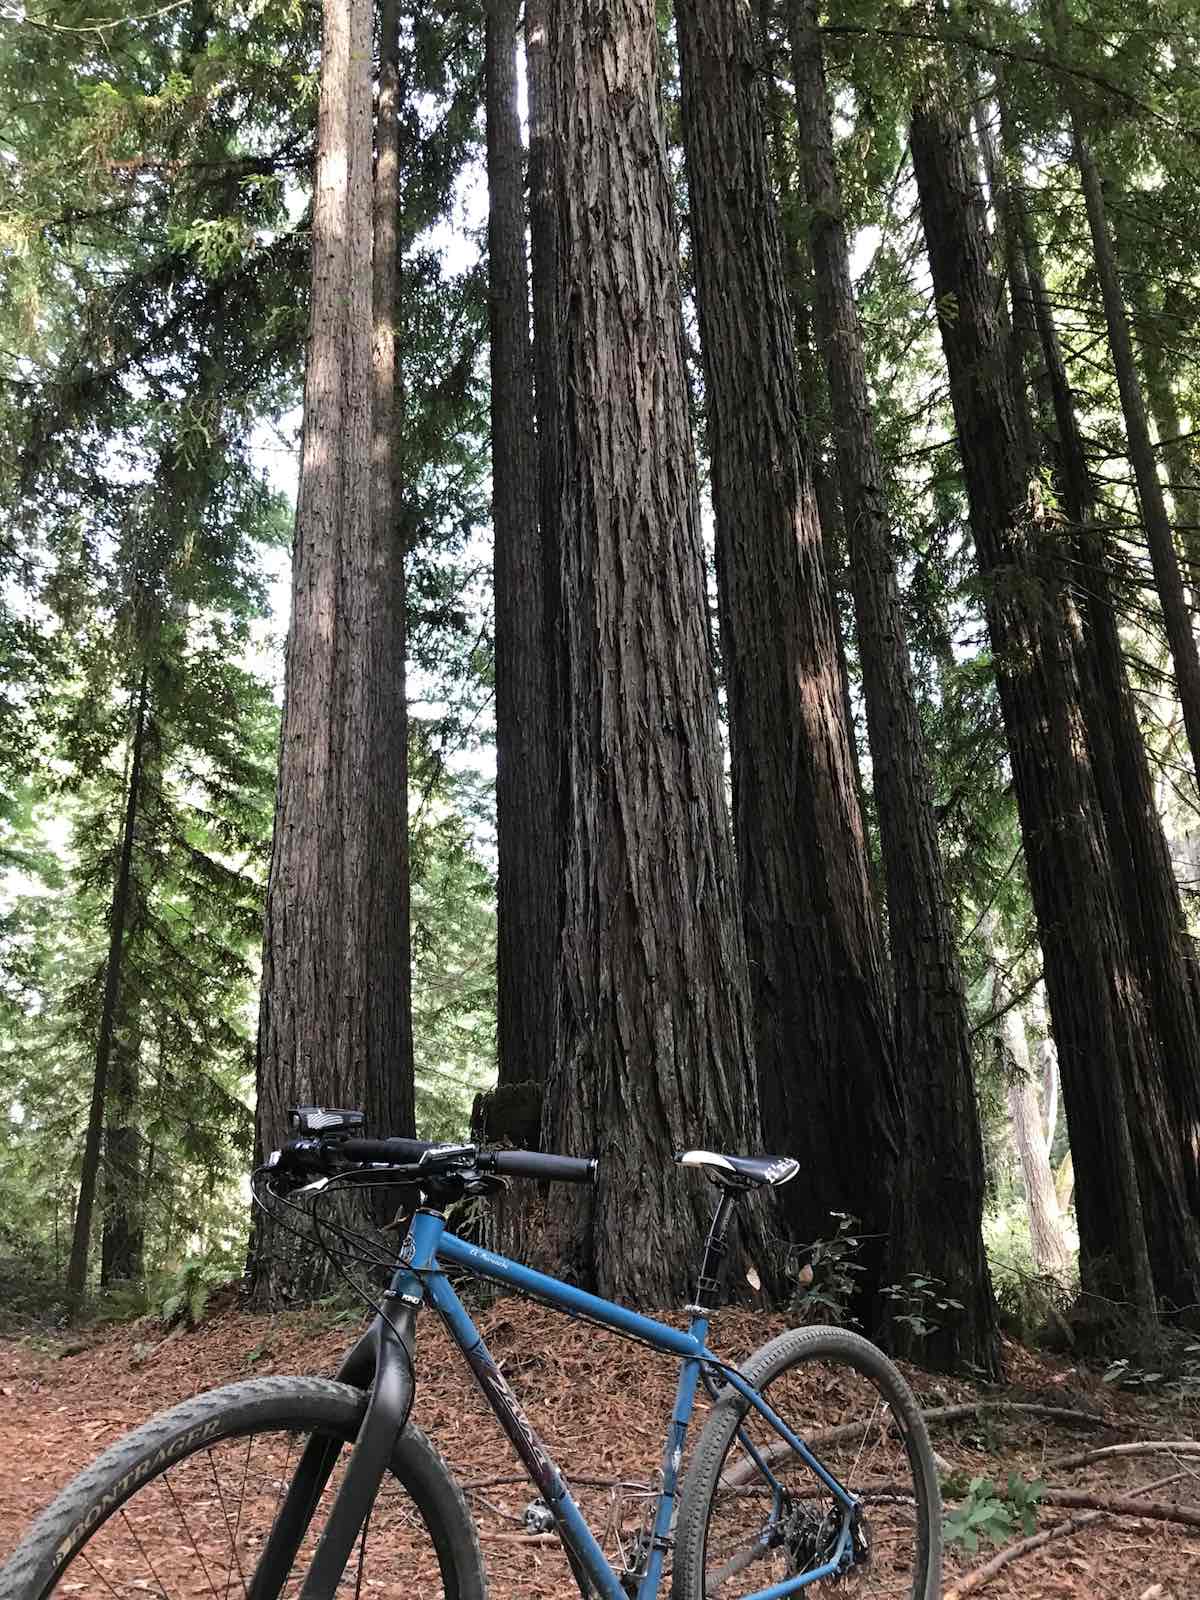 bikerumor pic of they day Waterfall Grove trail - deep in the heart of the Mendocino coastal mountains of Jackson State Demonstration Forest mountain bike ride.